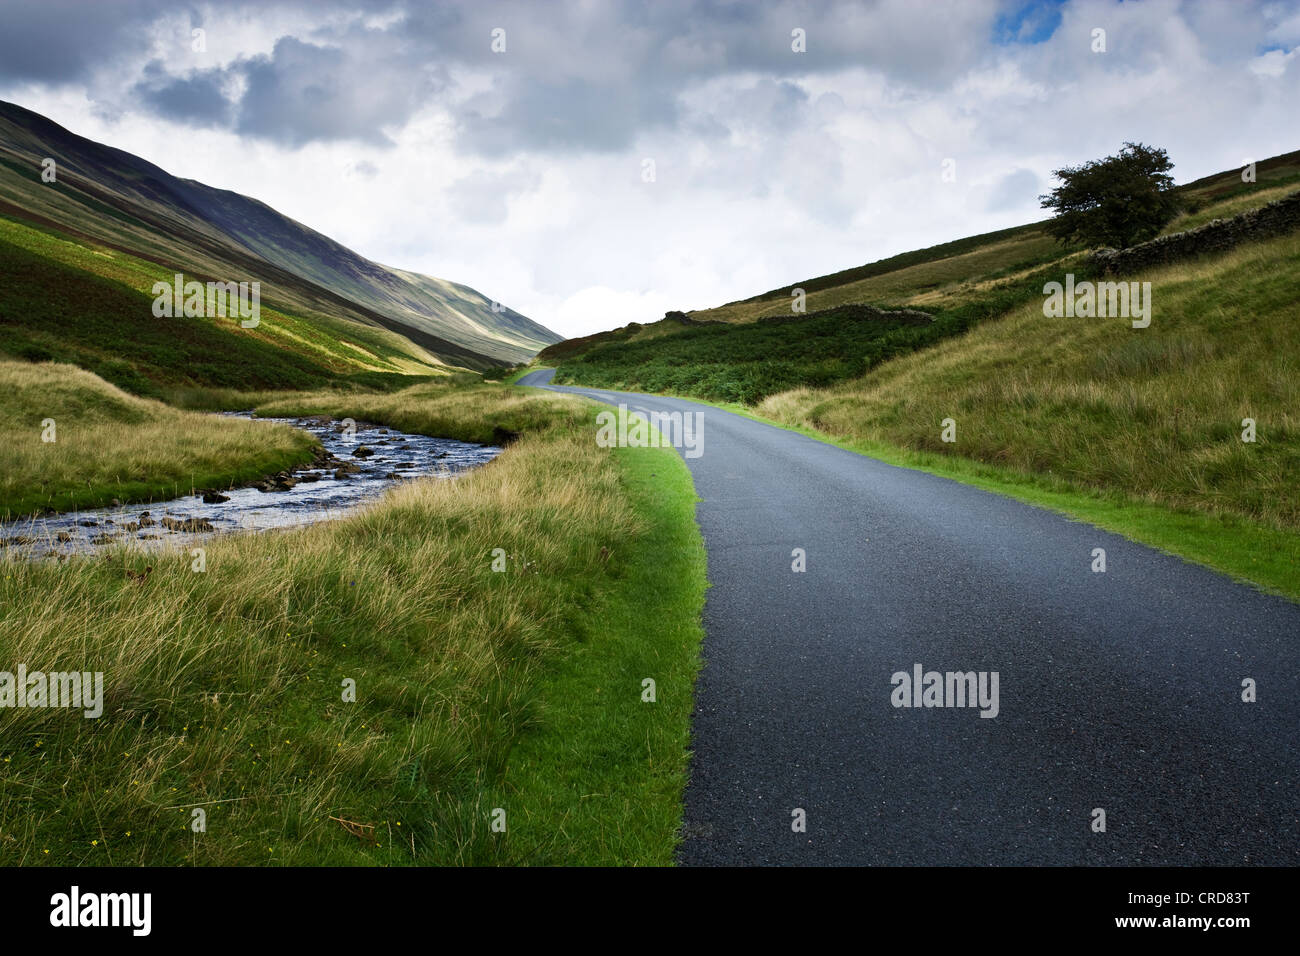 country roads in the Lake district uk  cgi car backgrounds summer fluffy clouds hills Stock Photo